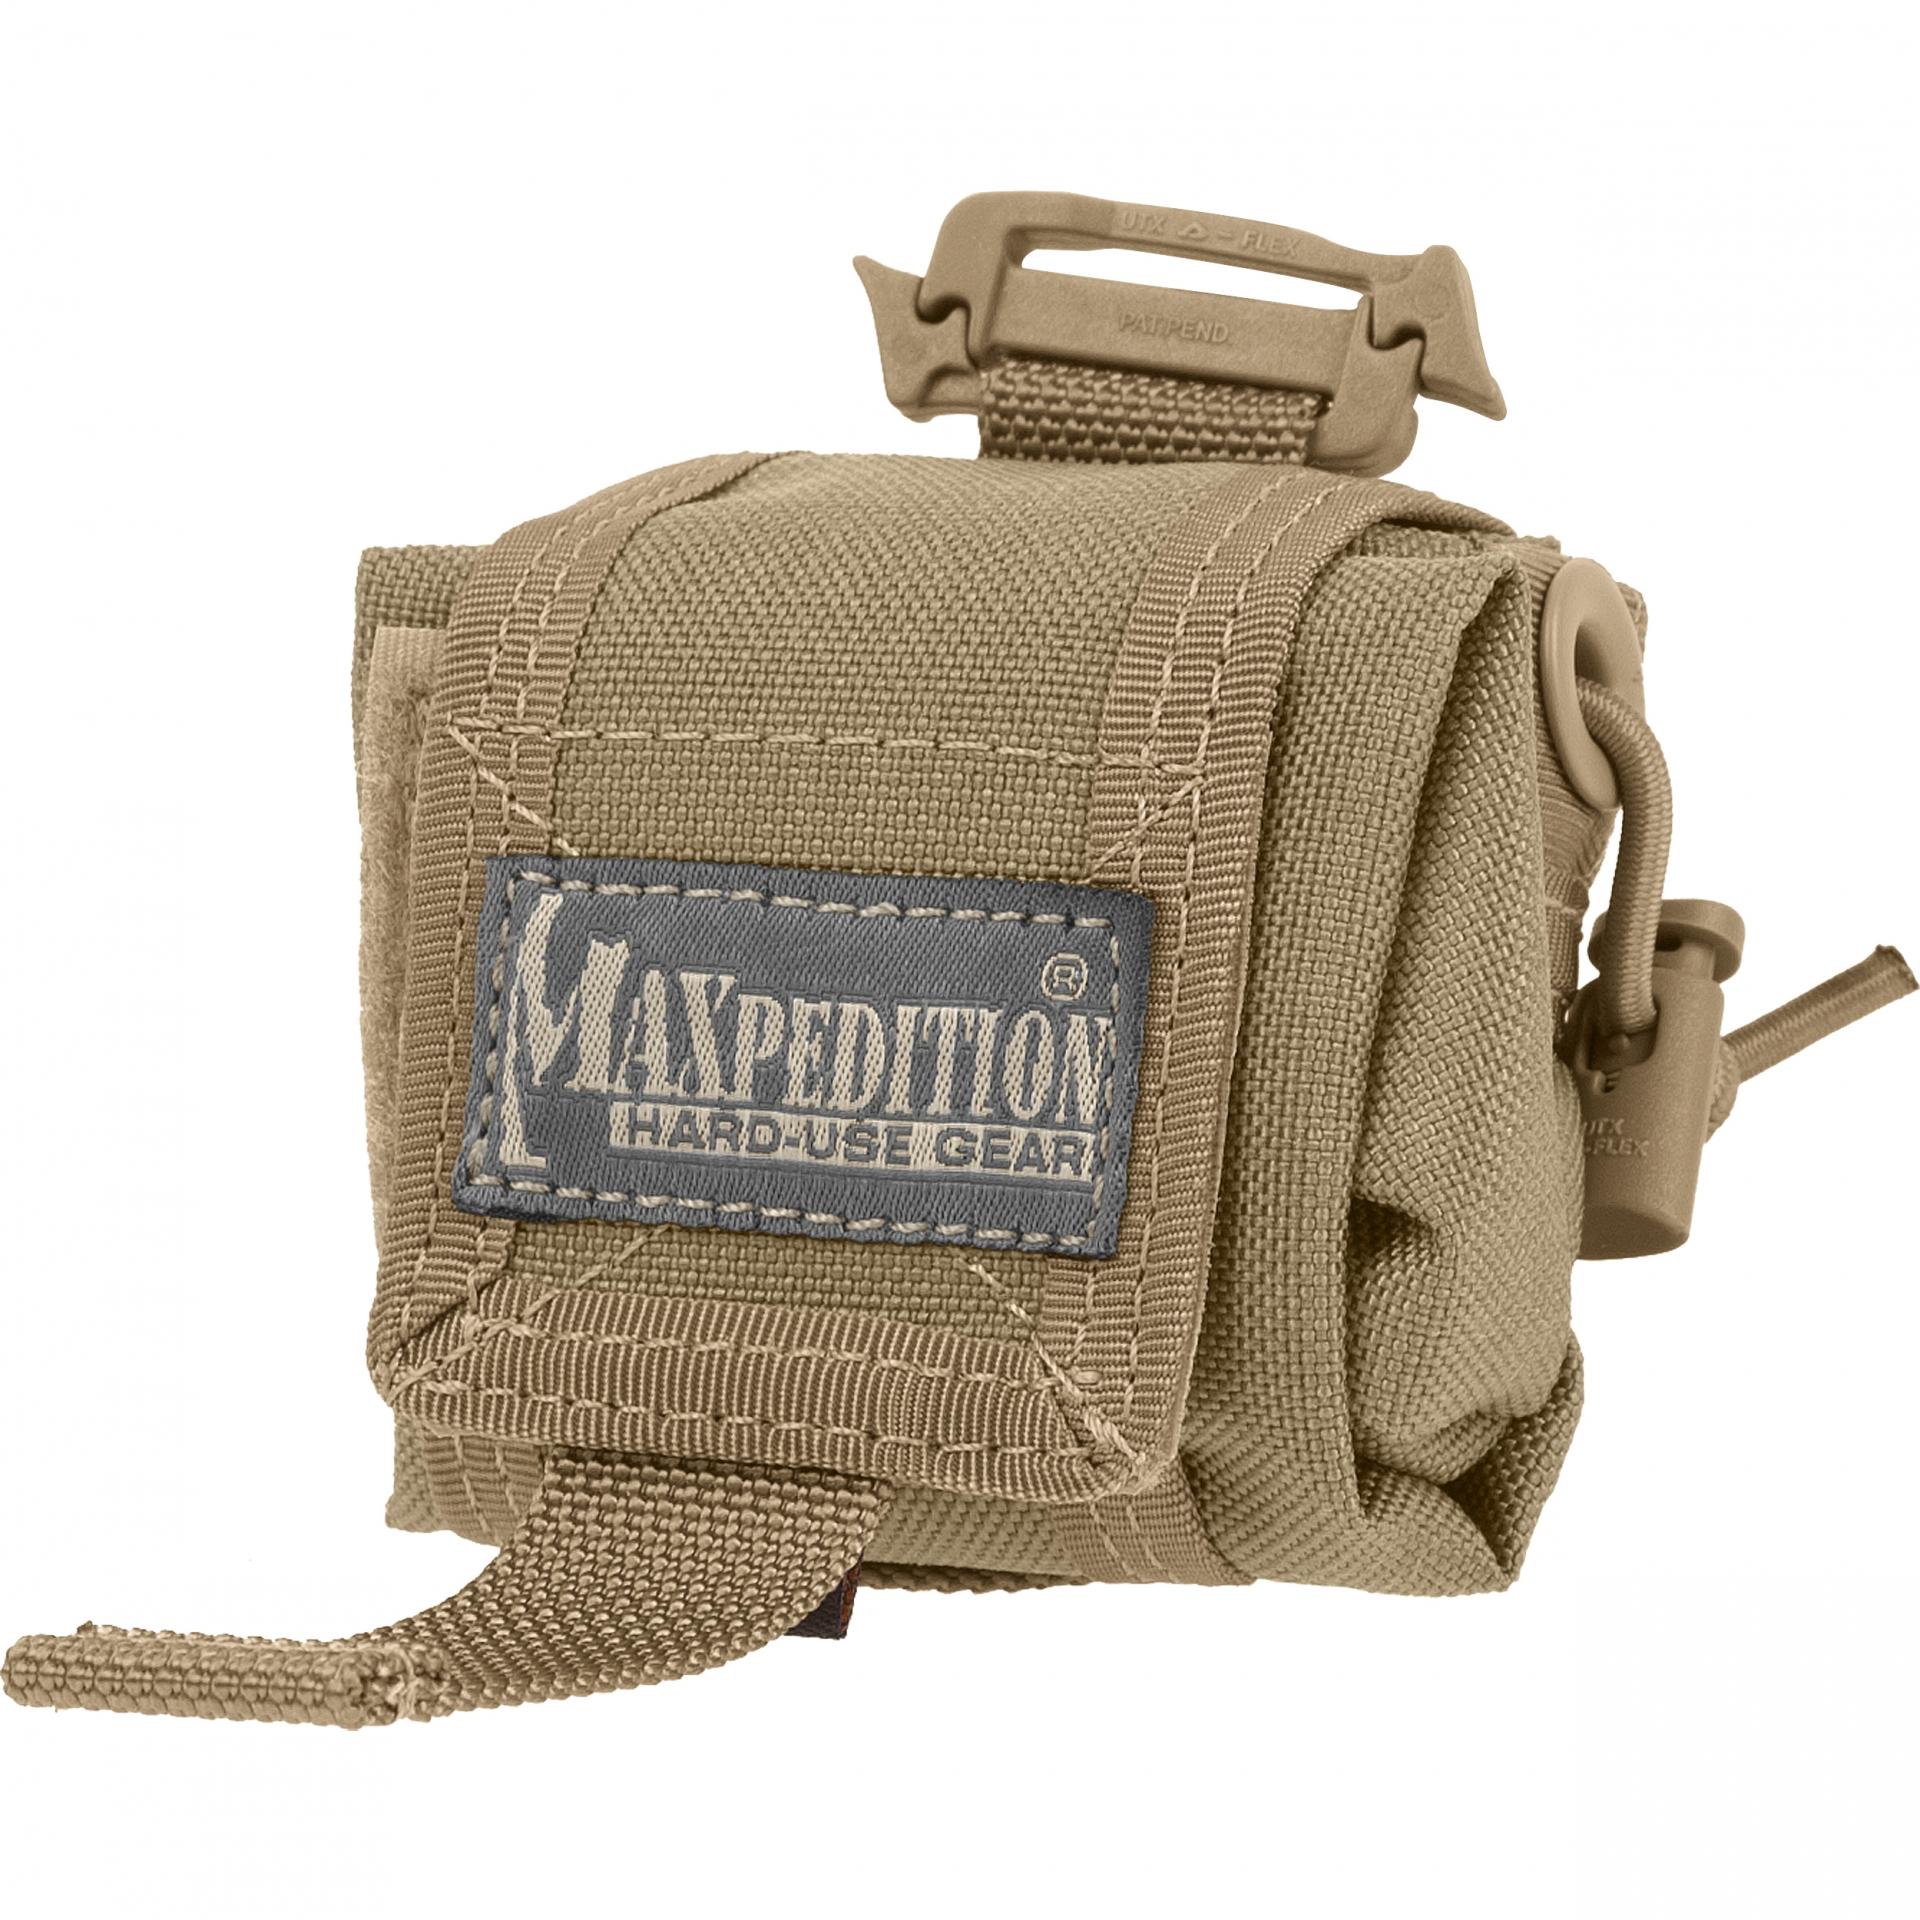 Maxpedition MINI ROLLYPOLY FOLDING DUMP POUCH 0207